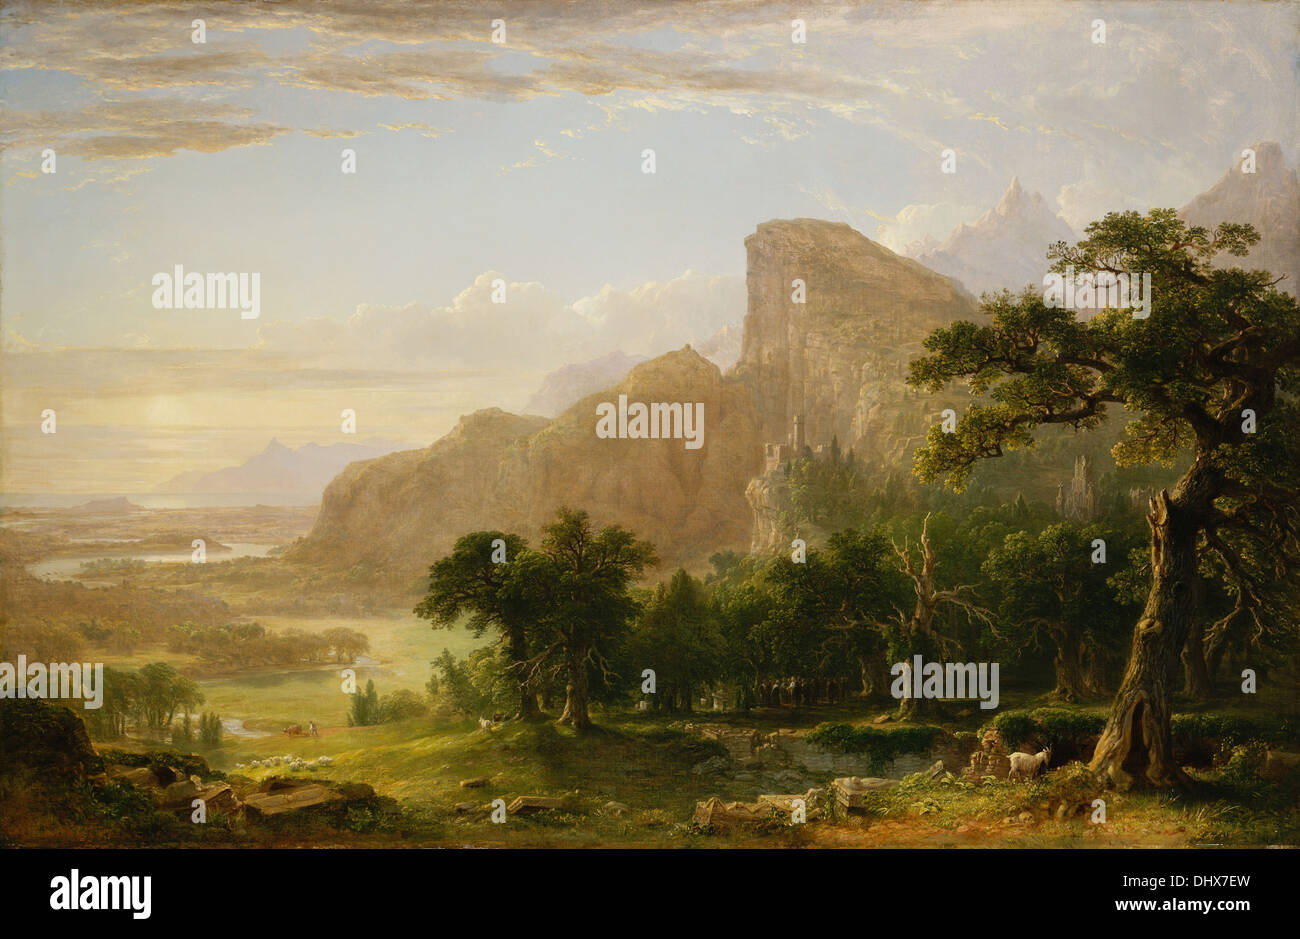 Landscape - Scene from 'Thanatopsis' - by Asher Brown Durand, 1850, Hudson River School Stock Photo